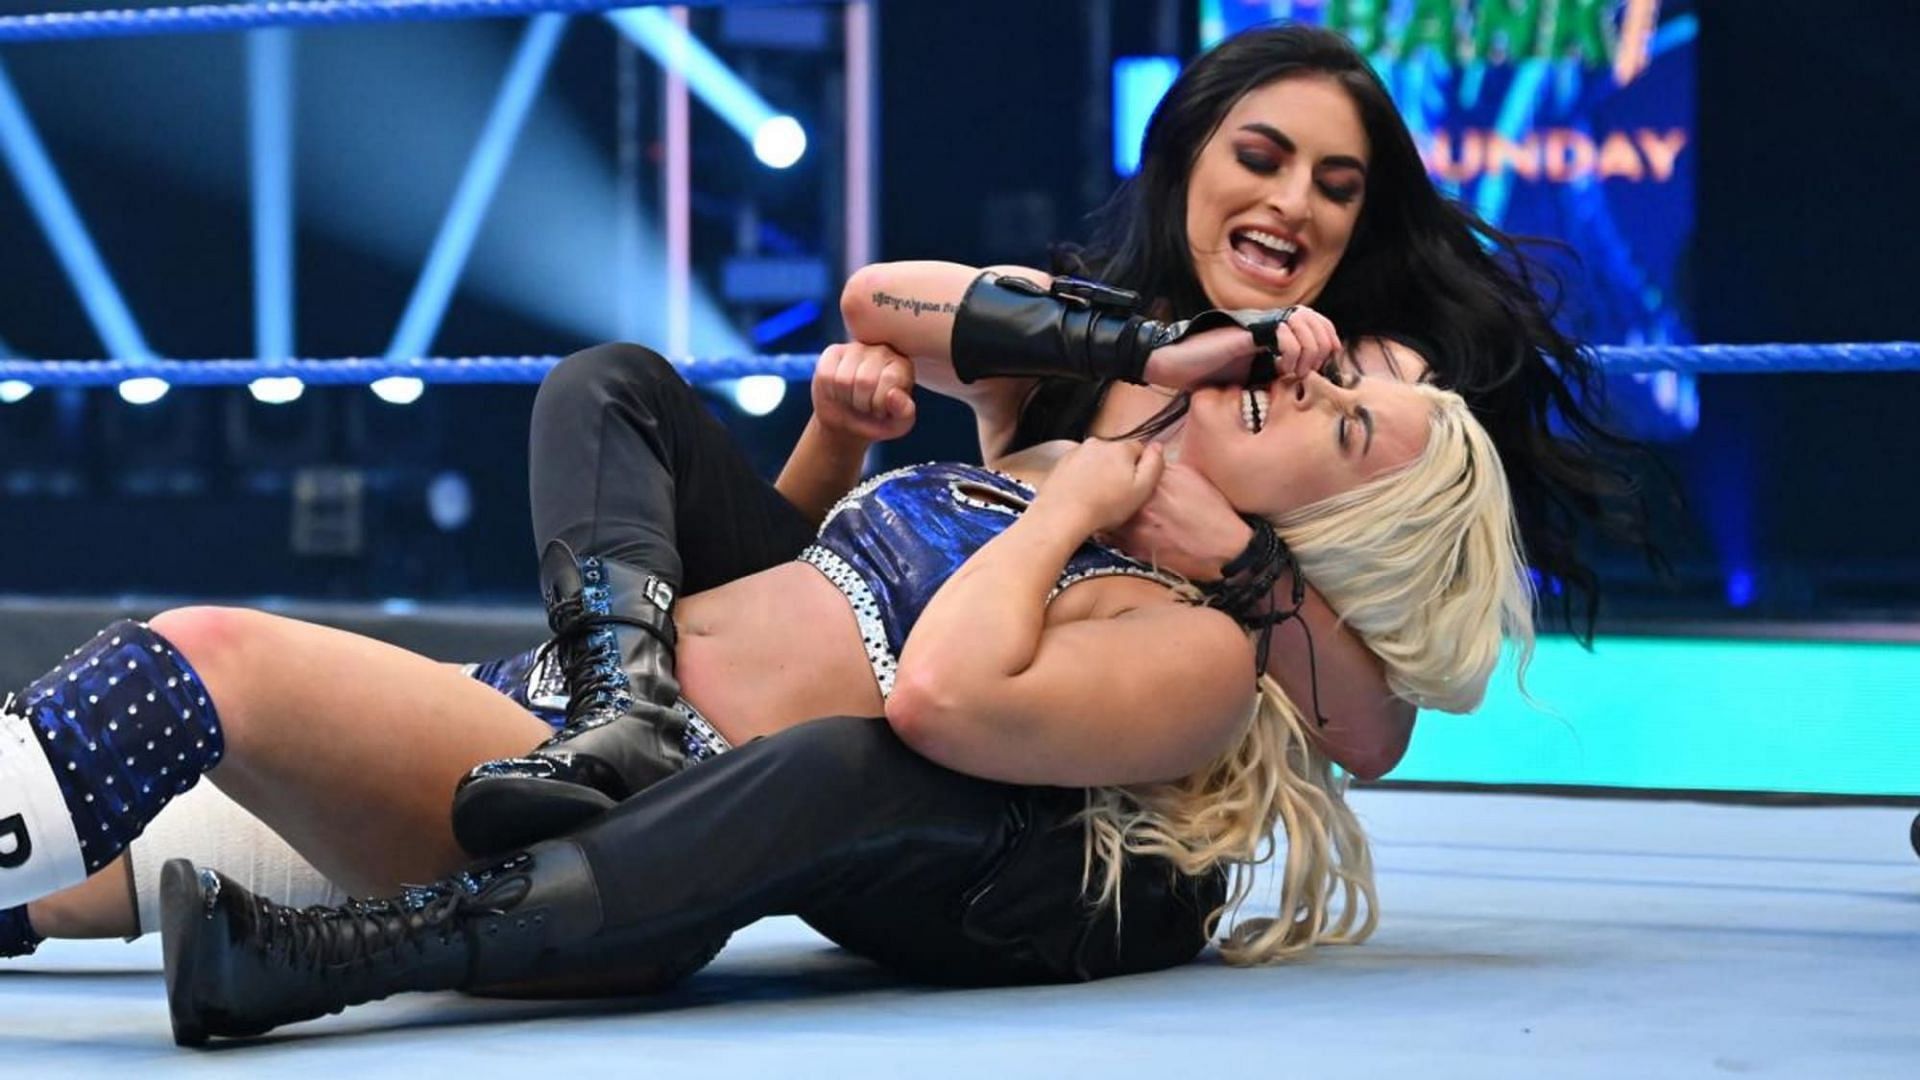 Sonya and Mandy faced each other at SummerSlam 2020